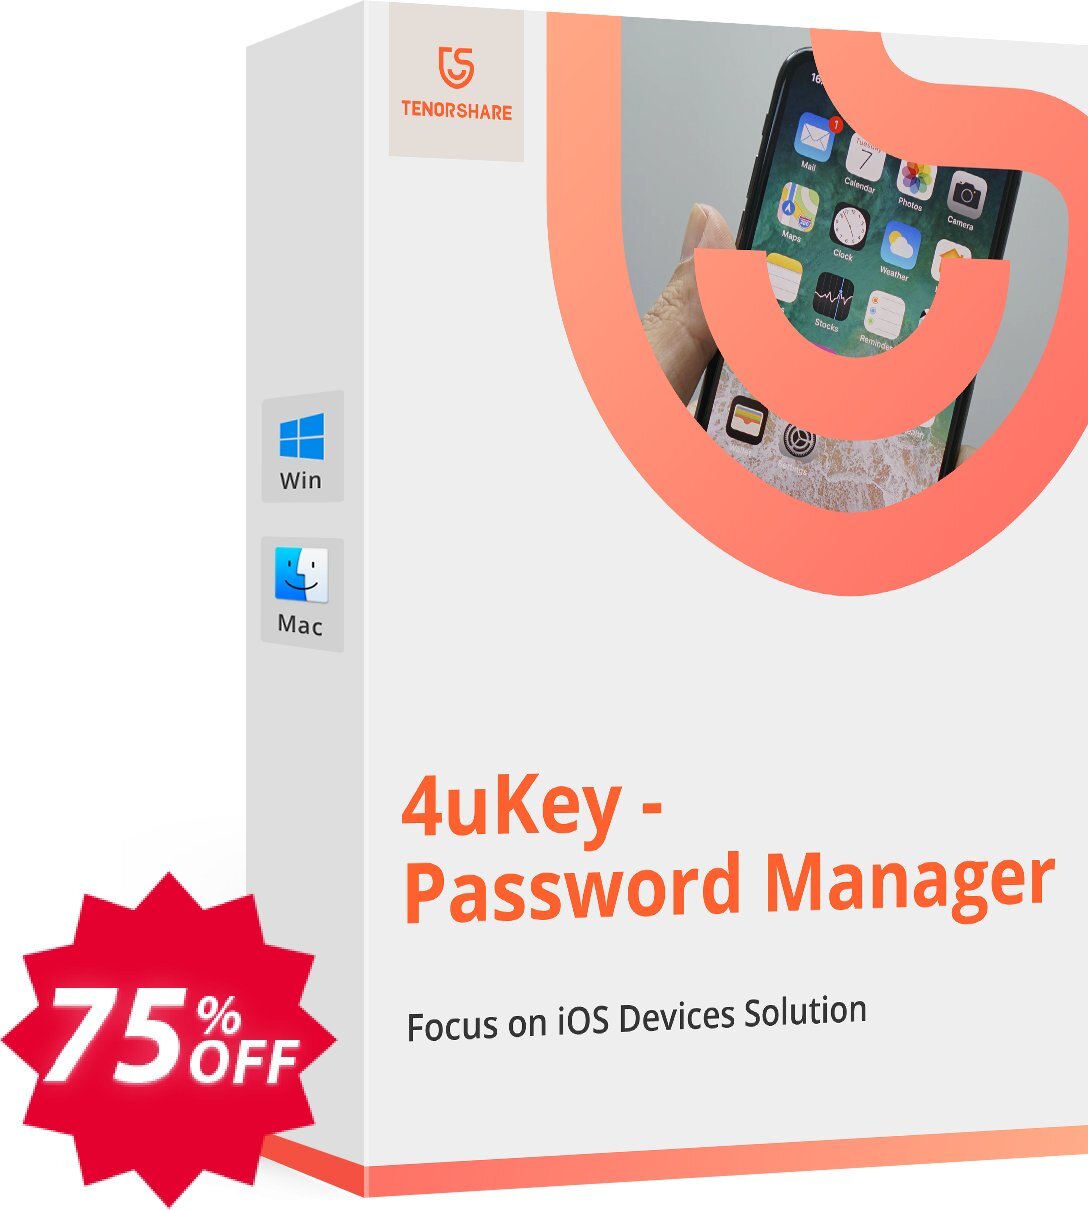 Tenorshare 4uKey Password Manager, Monthly Plan  Coupon code 75% discount 